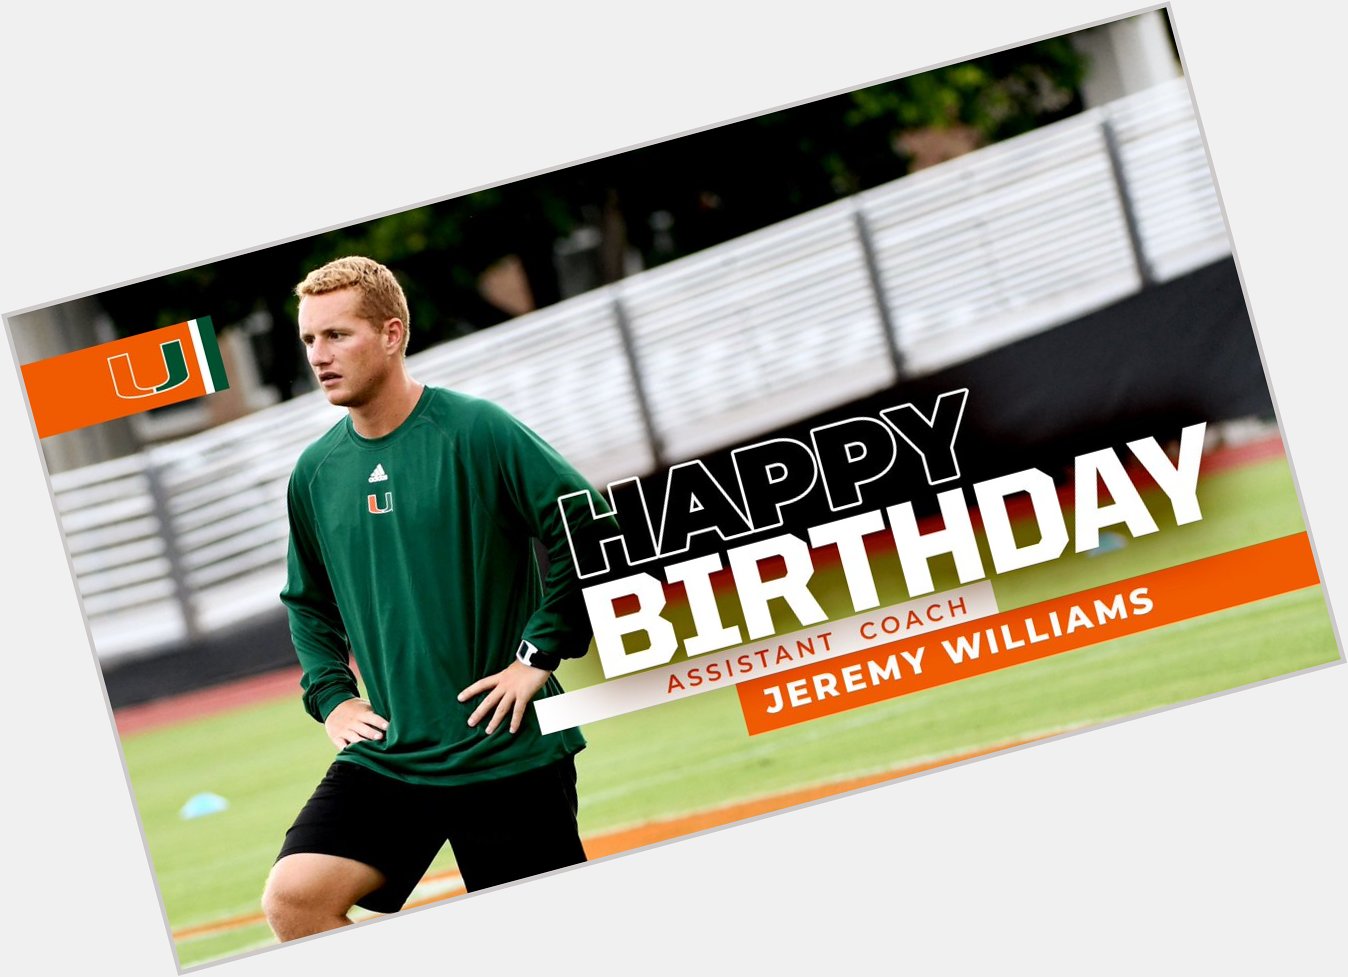 Today\s the big day for assistant coach Jeremy Williams... happy birthday Jeremy!   